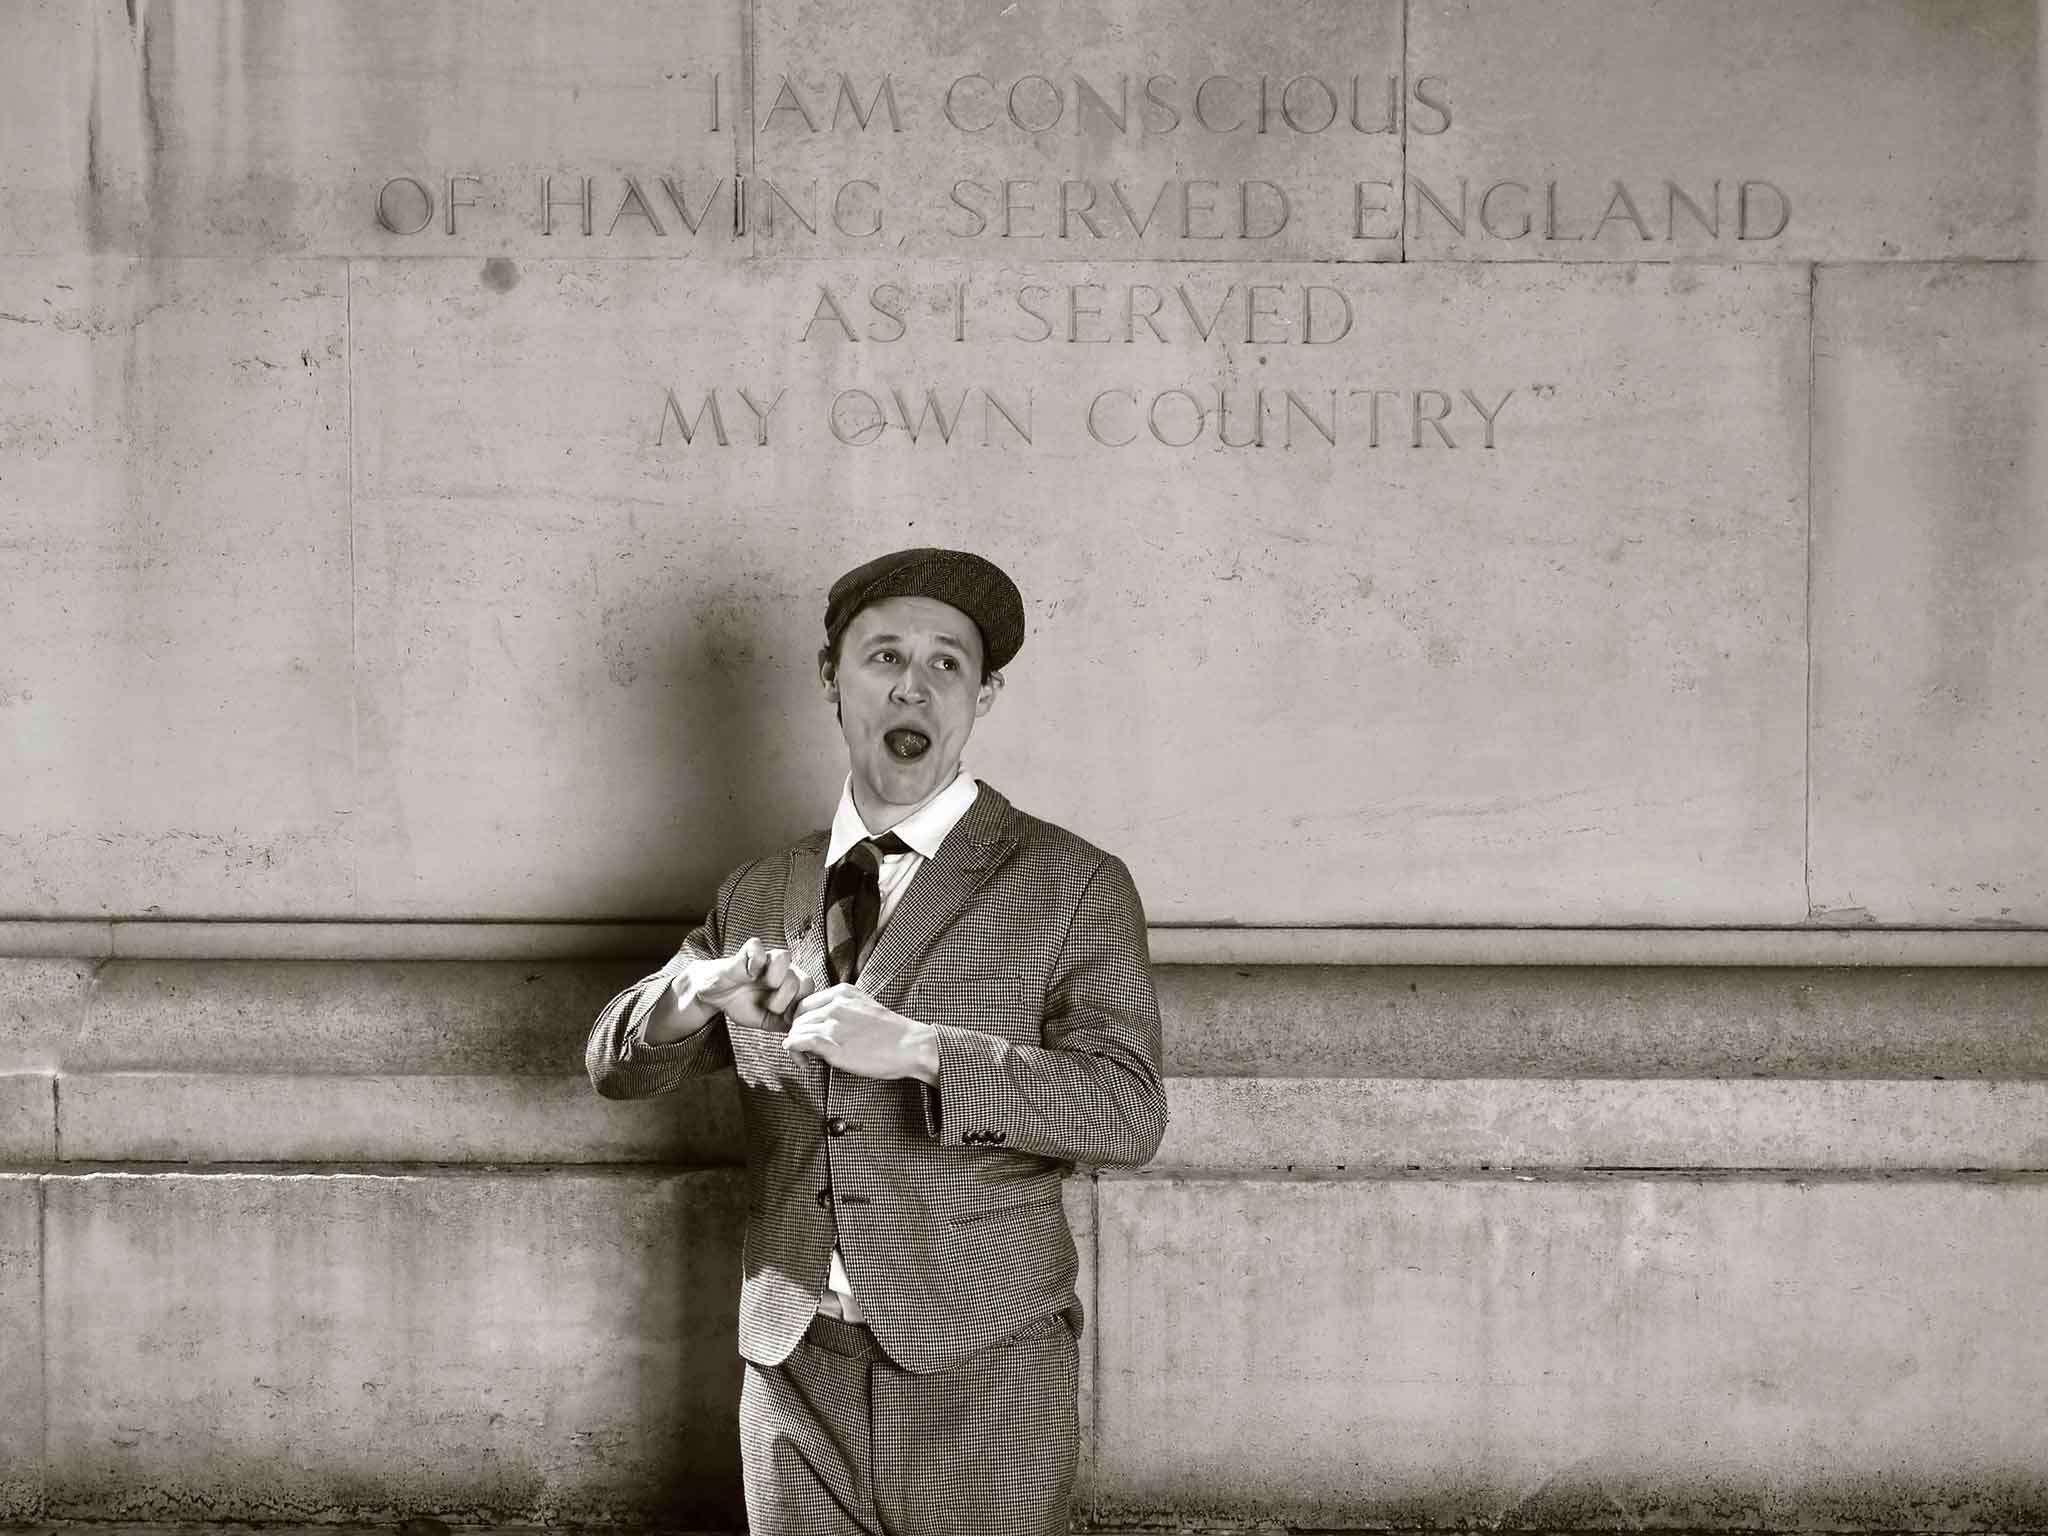 If the cap fits: Jack Lane as Norman Wisdom at the Marshal Foch statue in London, where Wisdom once slept rough